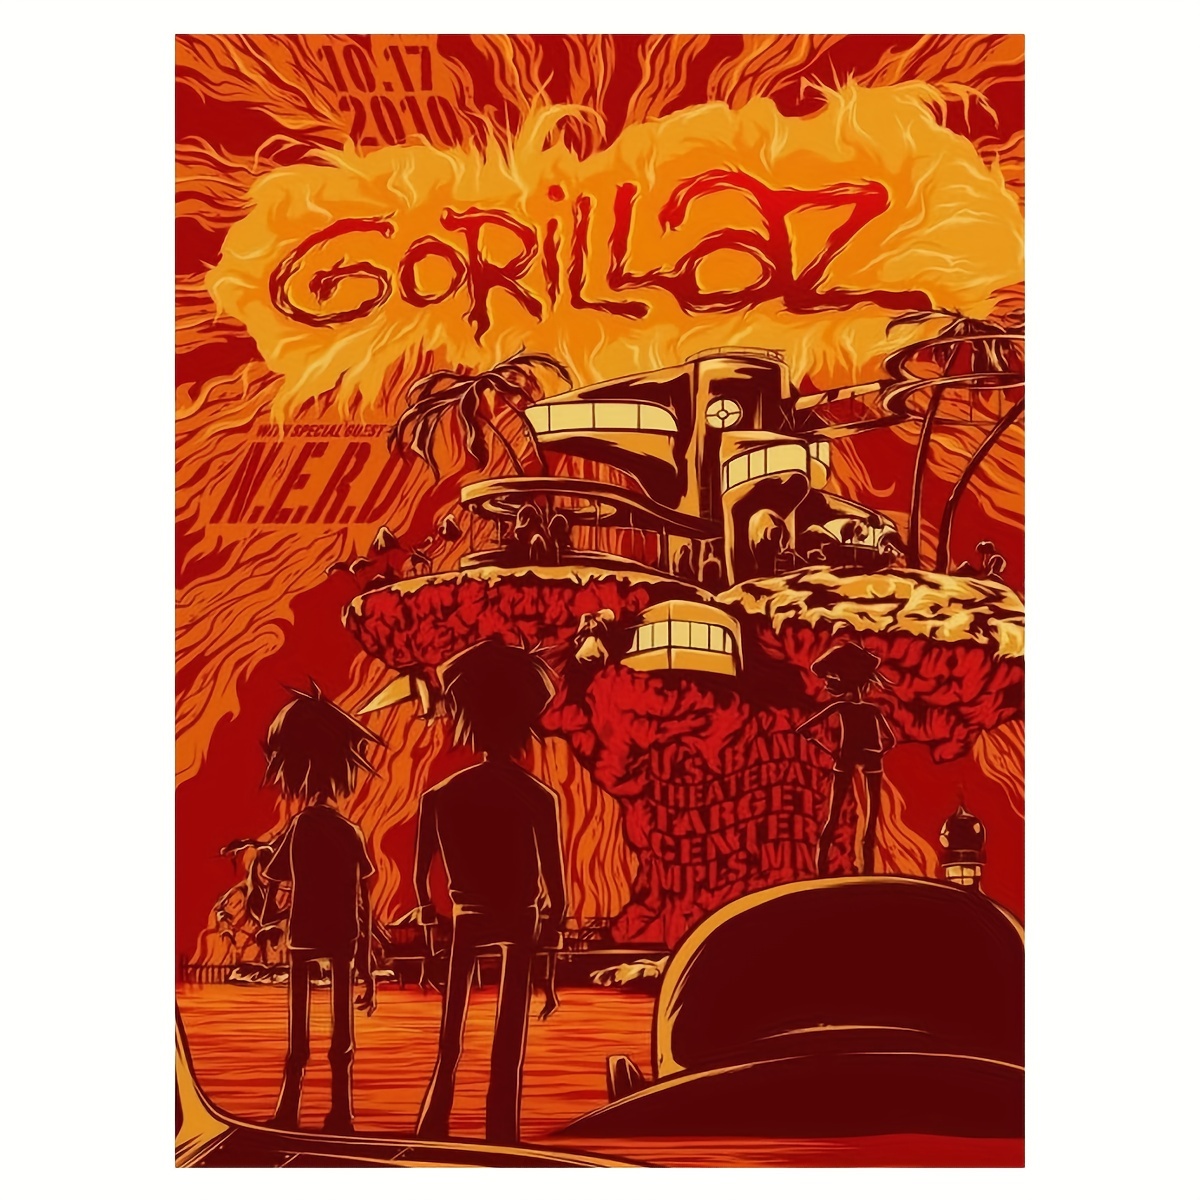 

Gorillaz Poster Music Poster Rock Band Posters Canvas Wall Art Living Room Posters Bedroom Painting 12x18inch (30x45cm)